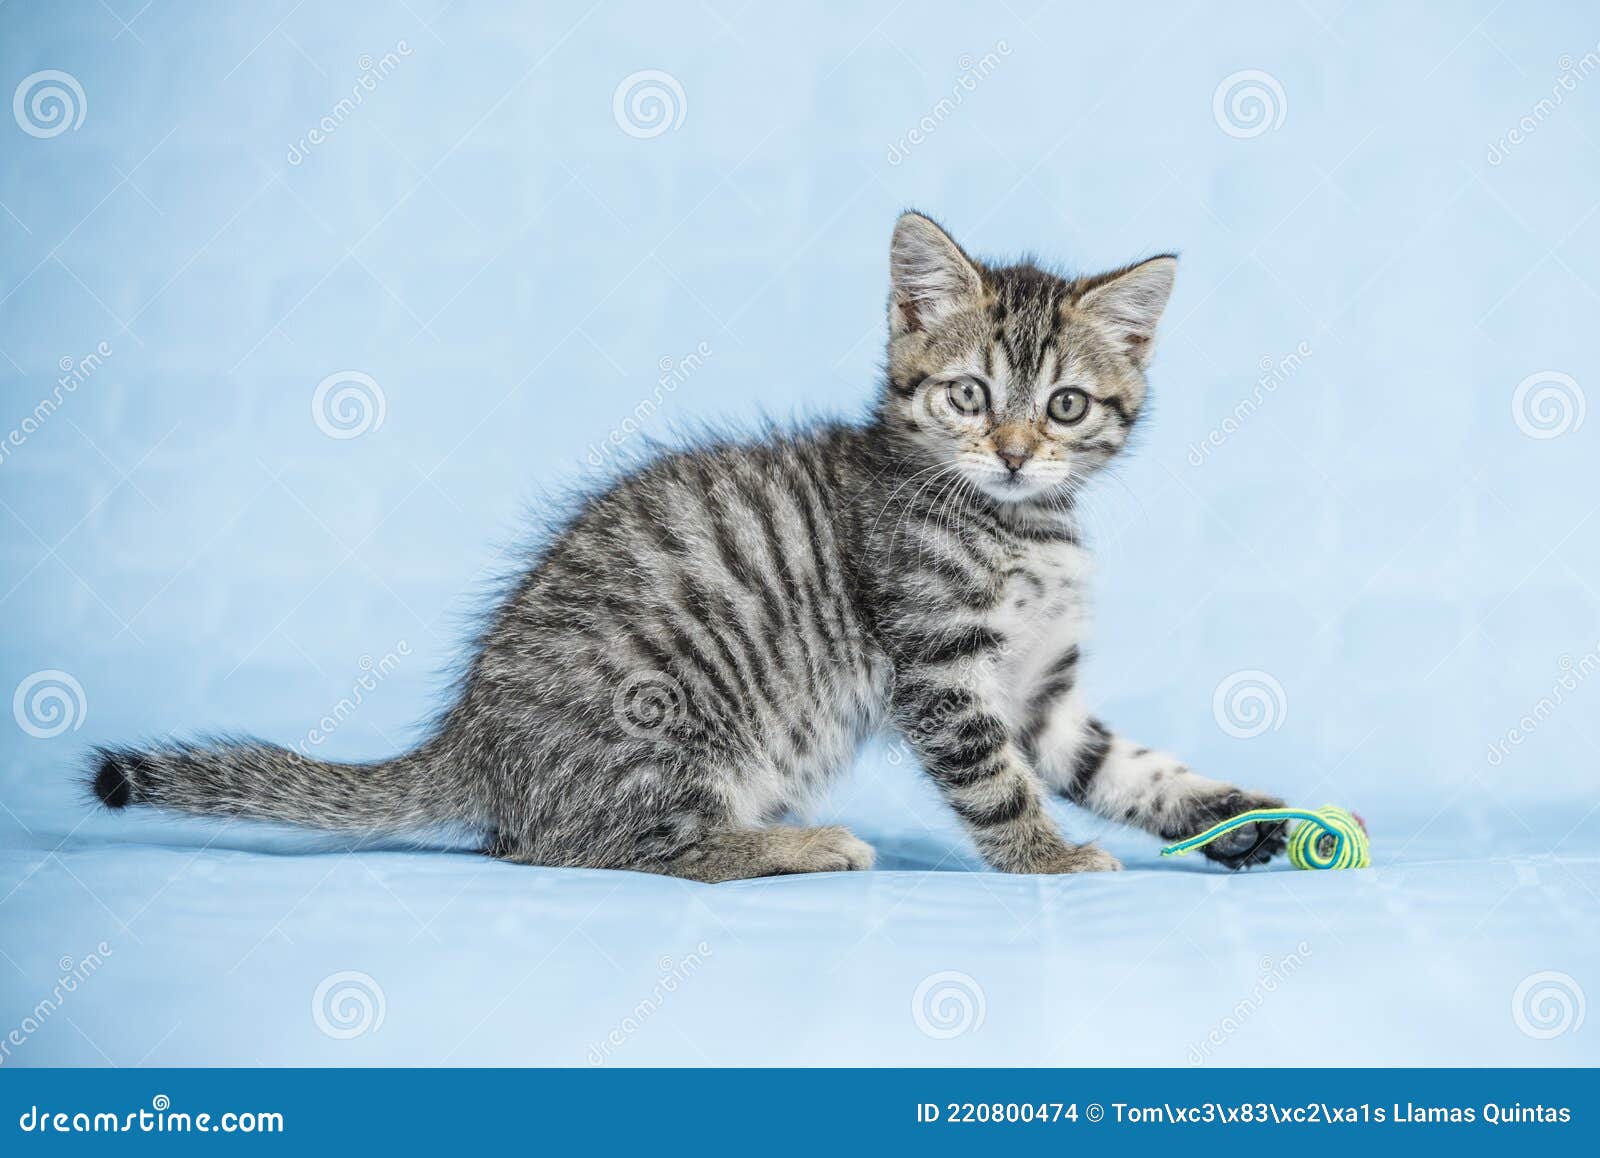 pretty baby striped cat playing with a gaudy colored rope mouse